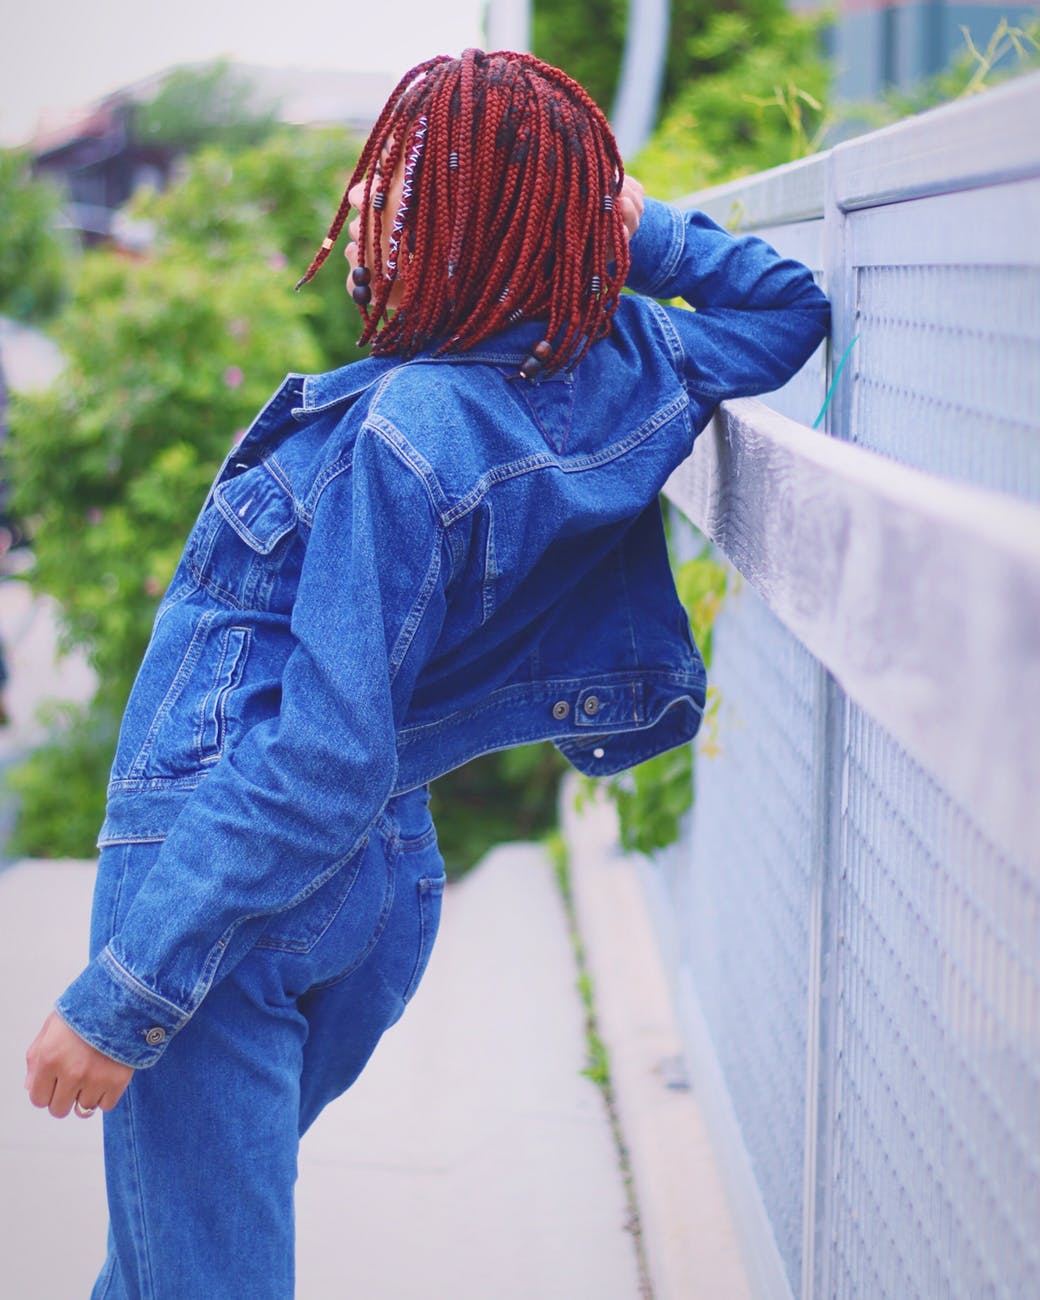 back view photo of woman in denim outfit leaning against metal fence